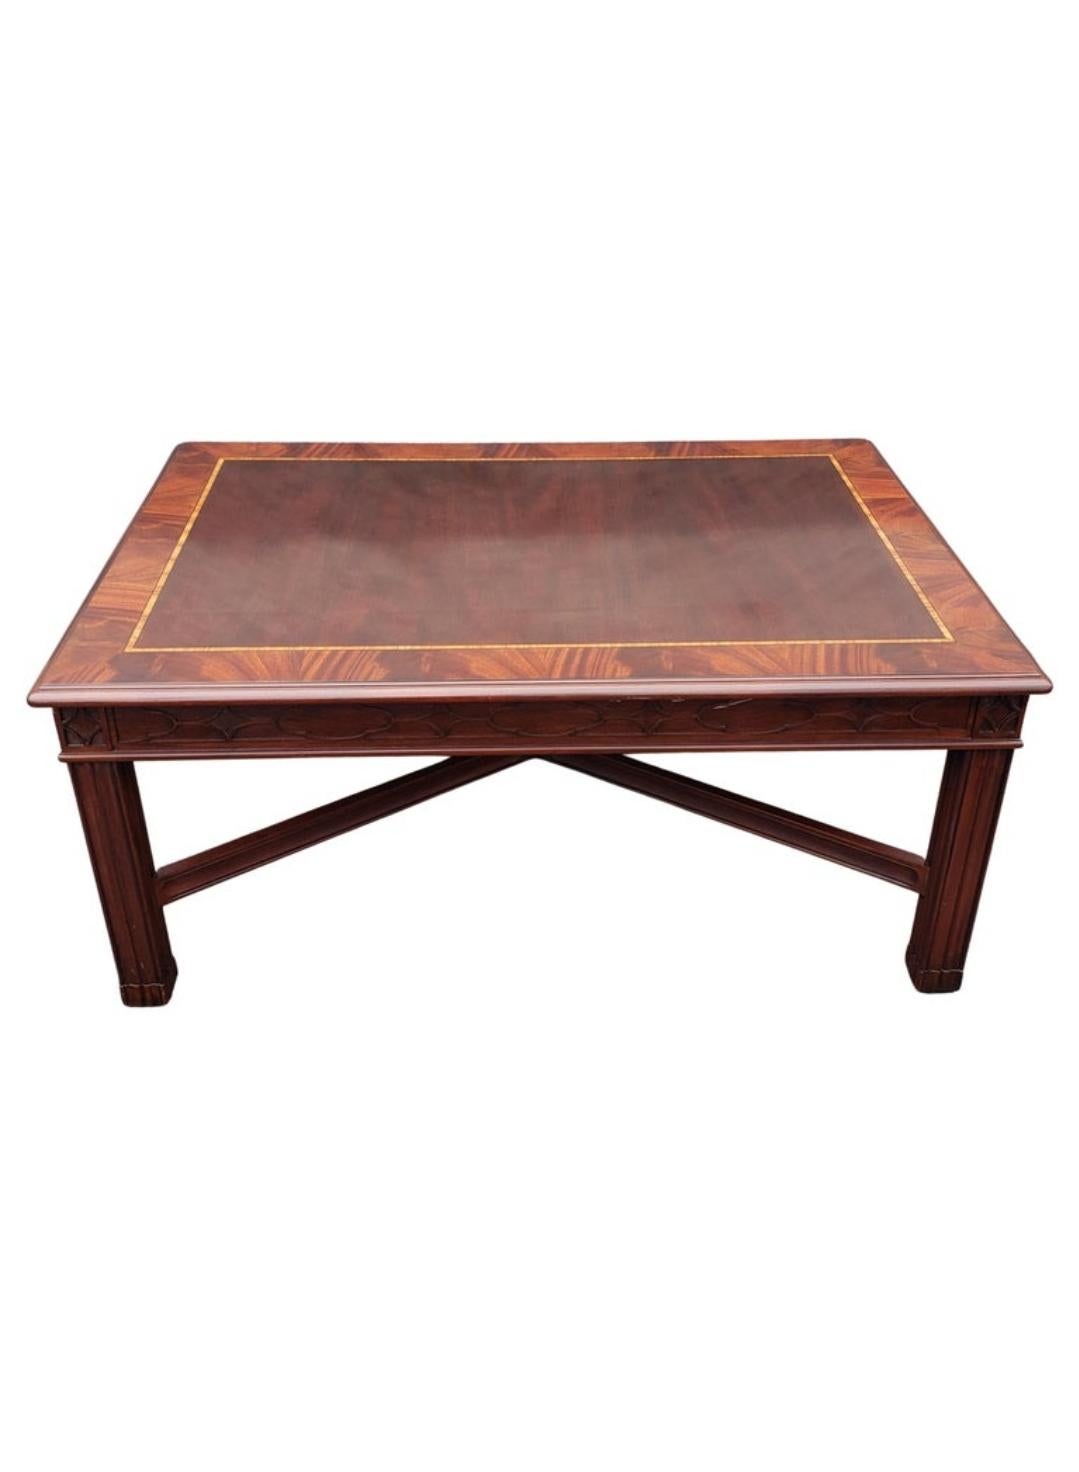 A Recently refinished Henkel Harris Banded Flame Mahogany , tulipwood and Satinwood Inlay Coffee Table with blind Fretwork.
Figured mahogany veneer top with crotch mahogany border with tulipwood
inlay and anigre separators. Apron has blind fret with